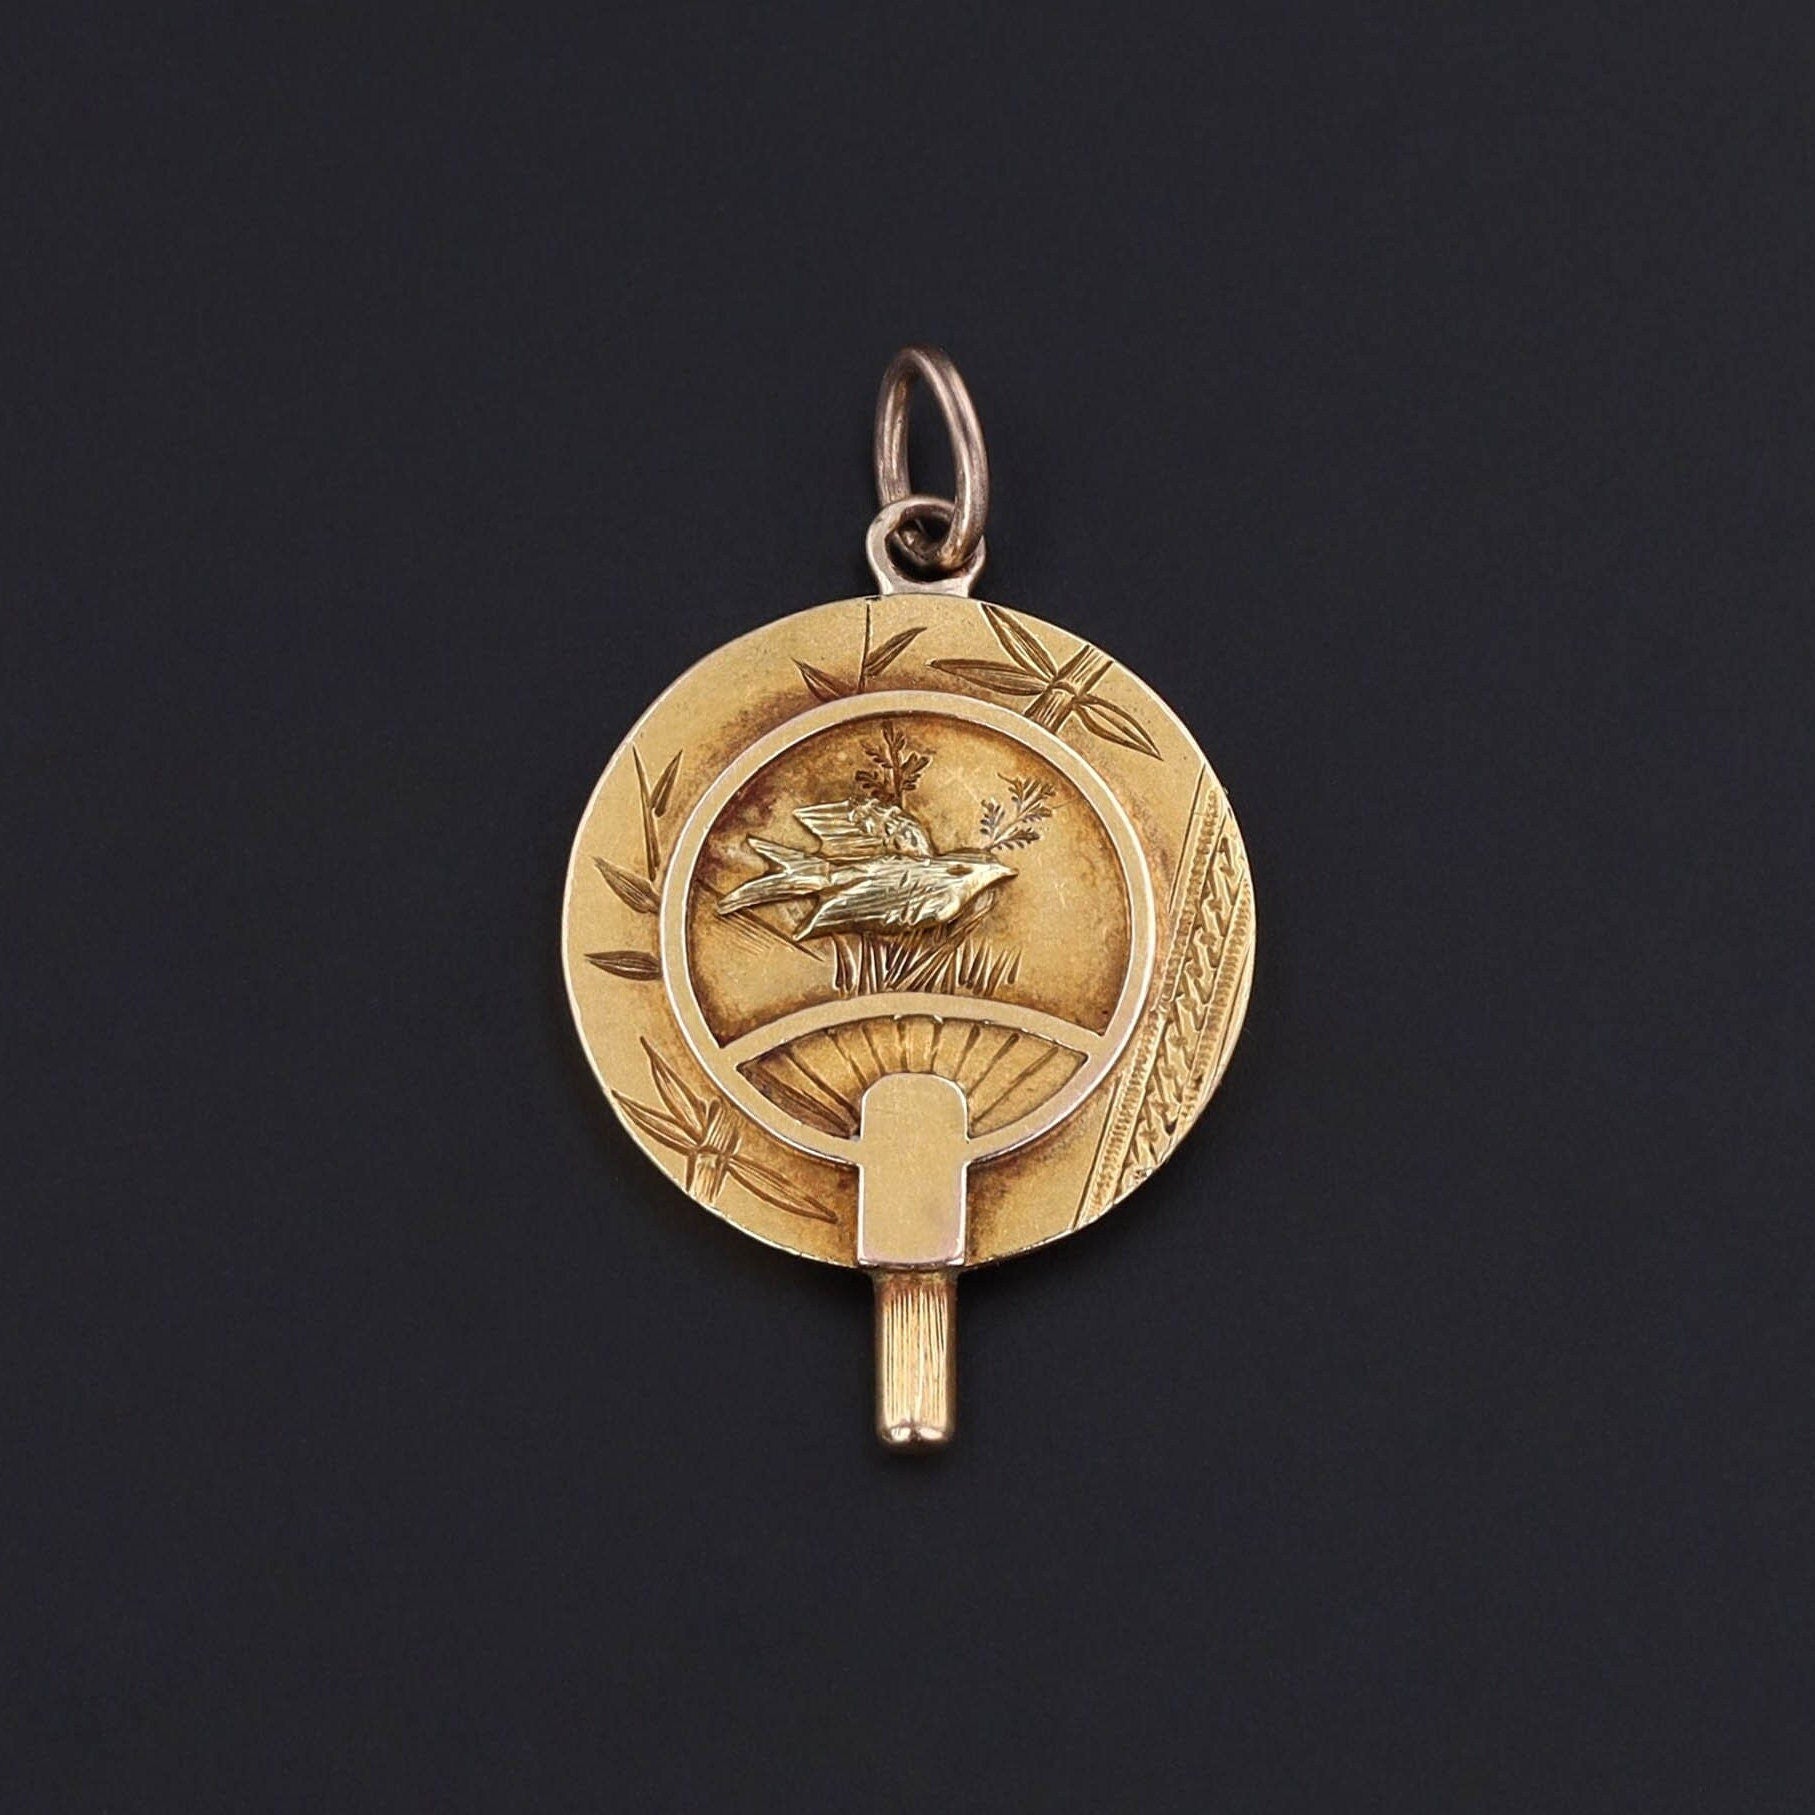 Antique Aesthetic Movement Fan Charm of 14k Gold